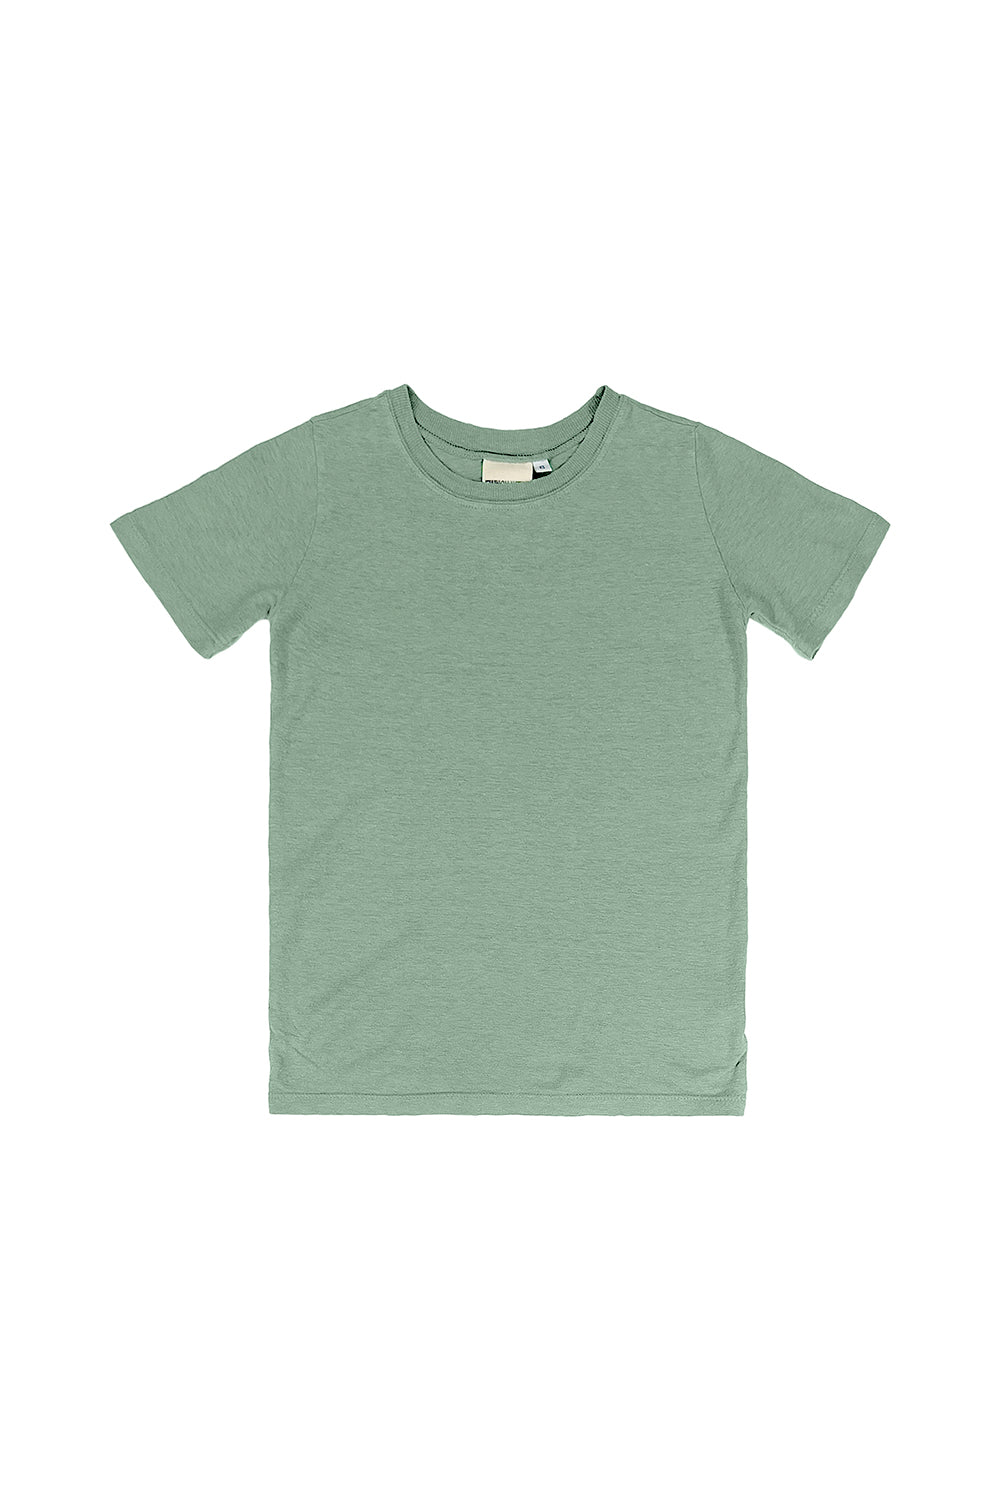 Grom Tee | Jungmaven Hemp Clothing & Accessories / Color: Sage Green